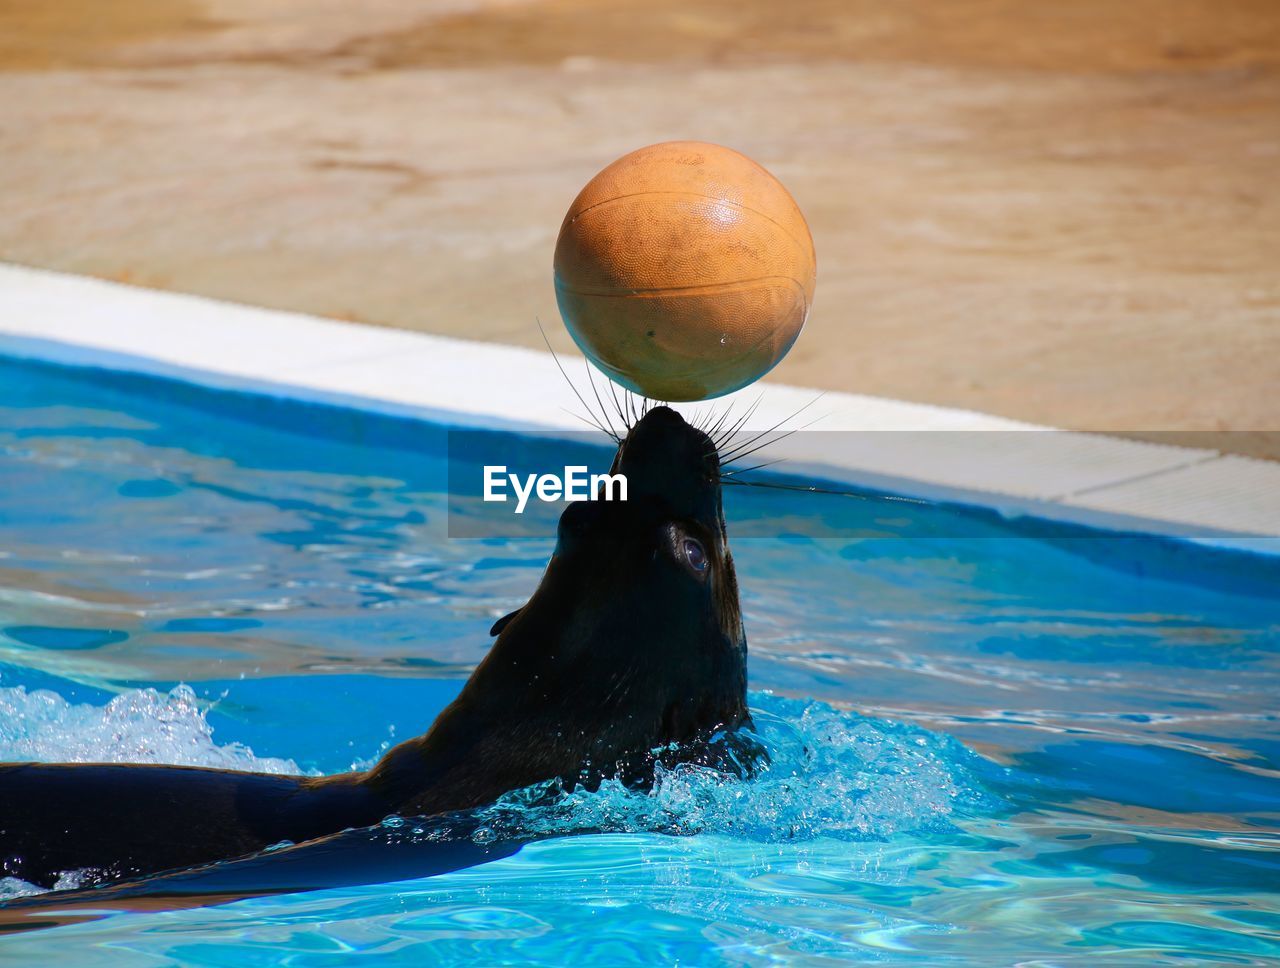 A seal with a ball